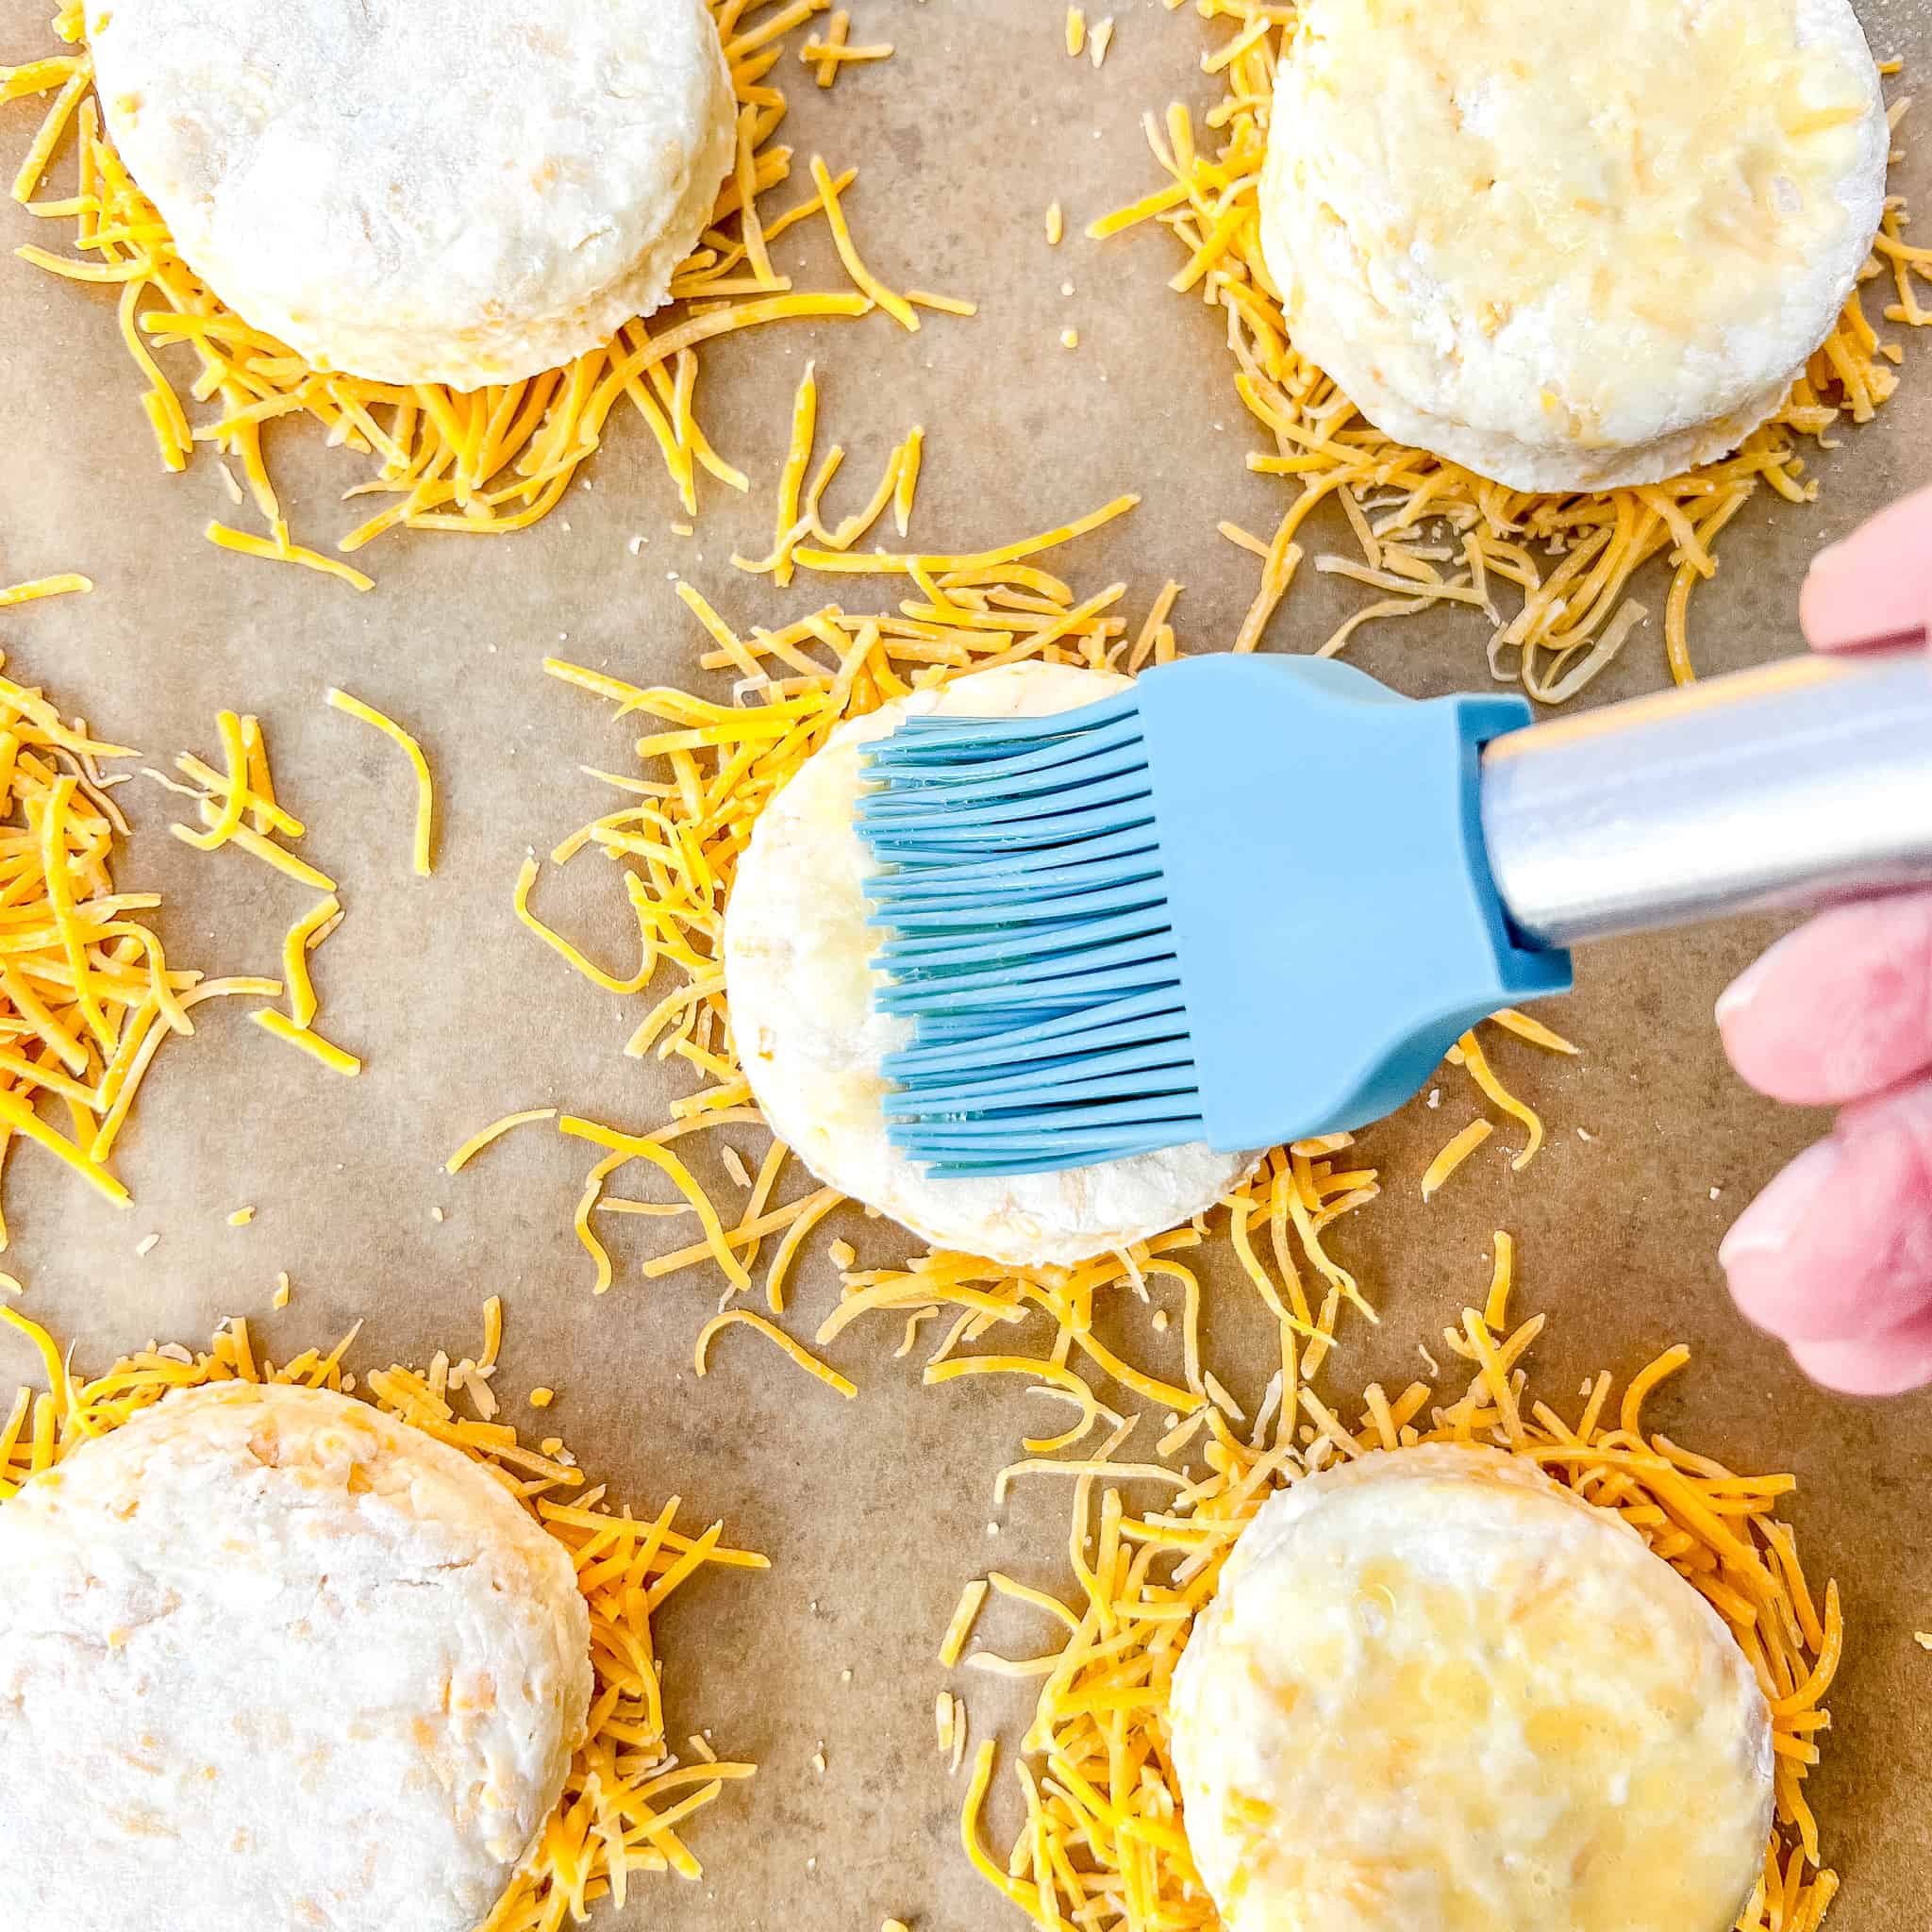 Egg washing biscuits on a pile of cheese.